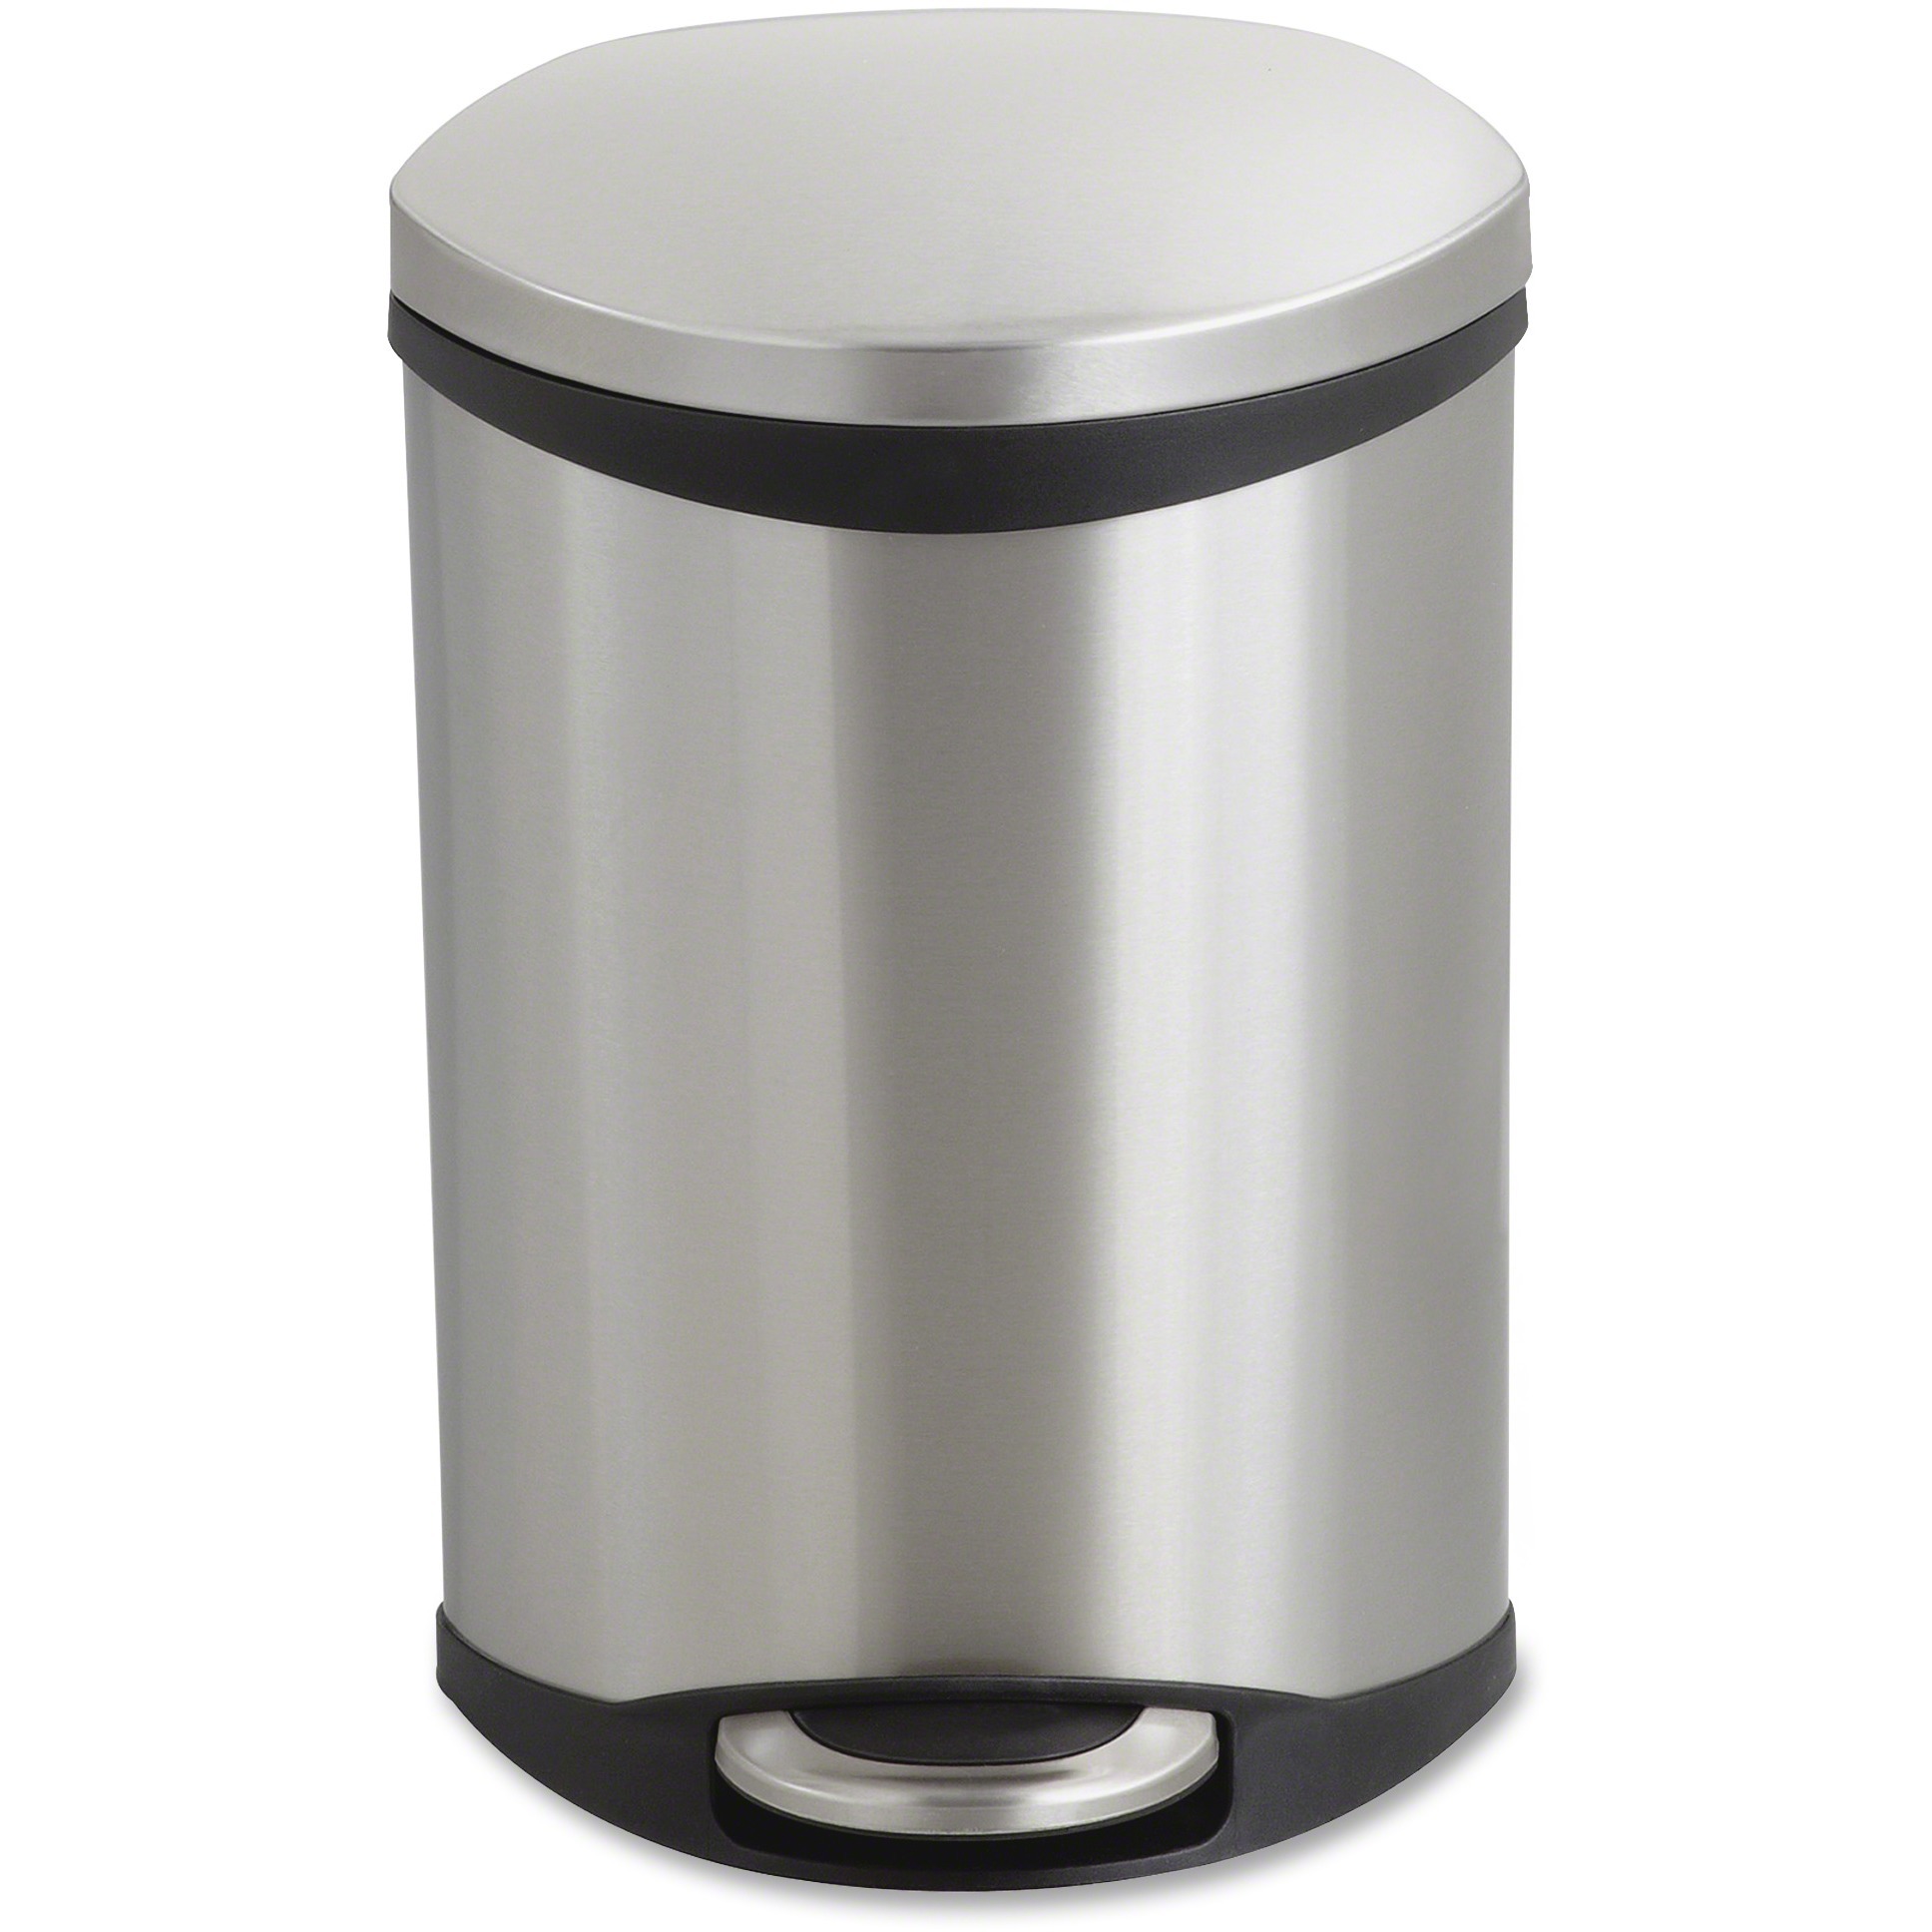 Safco Ellipse Hands Free Step-On Receptacle - 3 gal Capacity - 17" Height x 12" Width x 8.5" Depth - Steel, Plastic - Stainless 